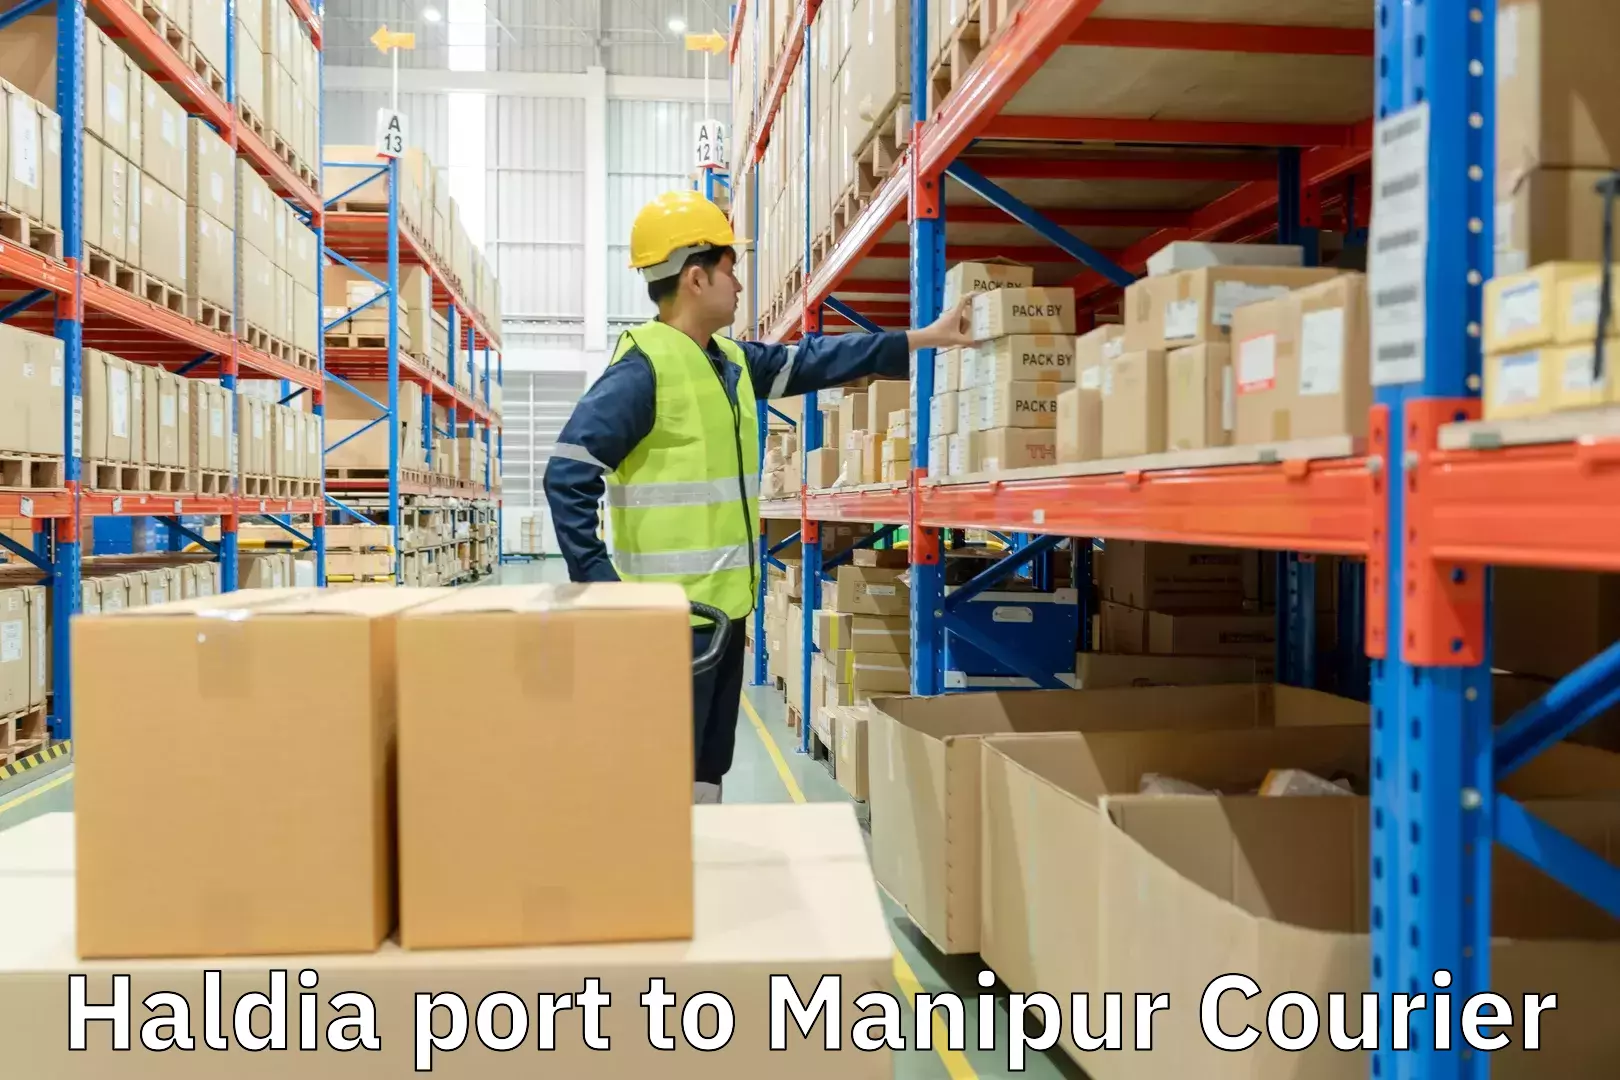 Small business couriers Haldia port to Manipur